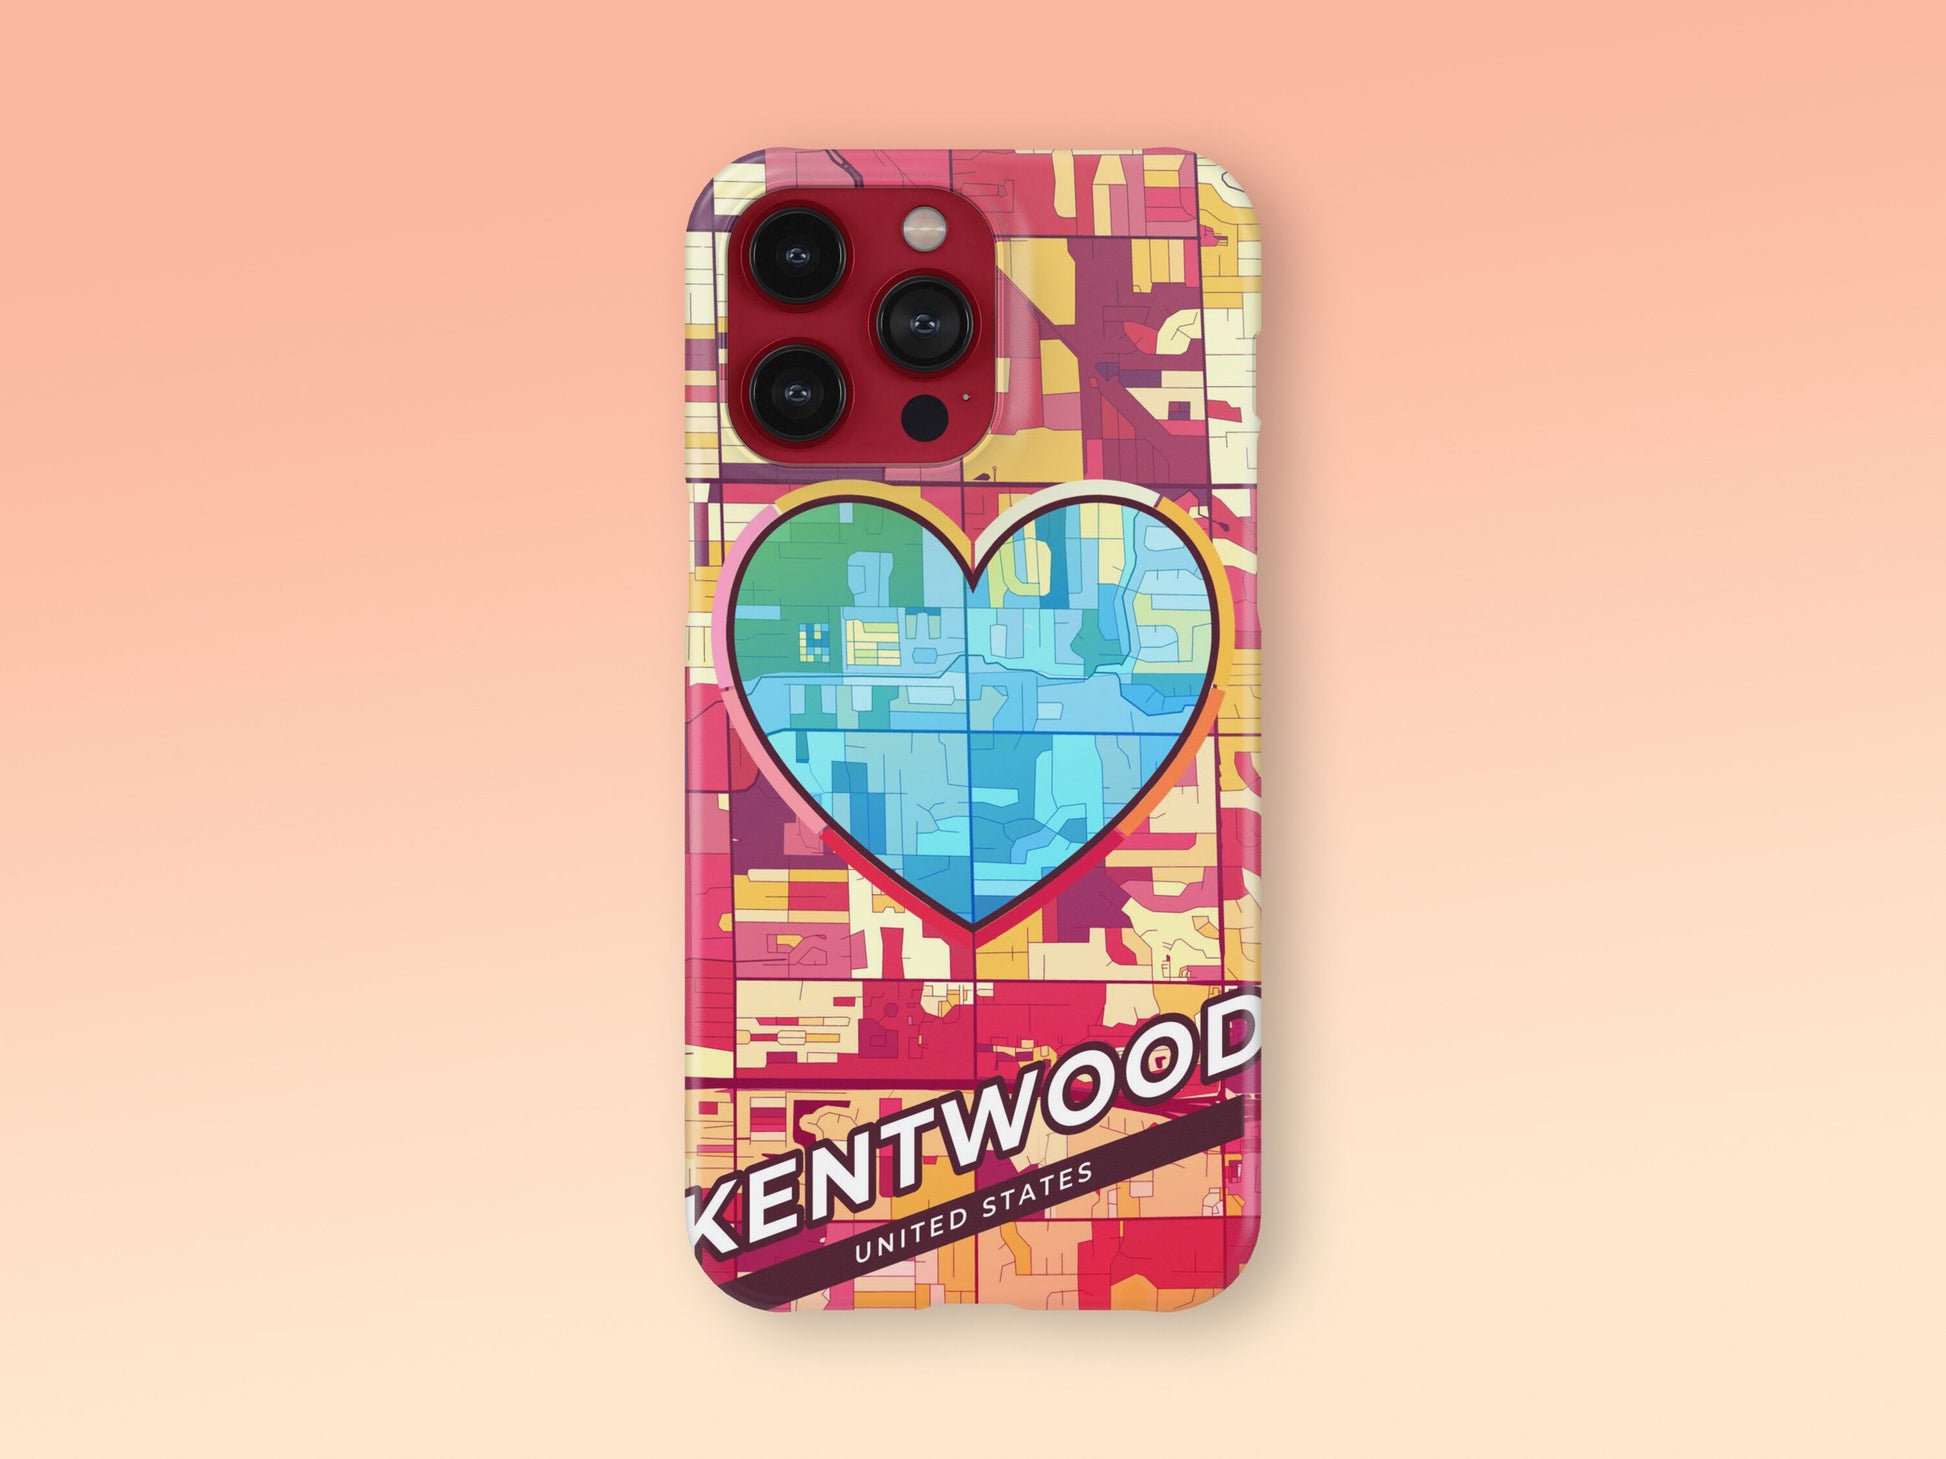 Kentwood Michigan slim phone case with colorful icon. Birthday, wedding or housewarming gift. Couple match cases. 2